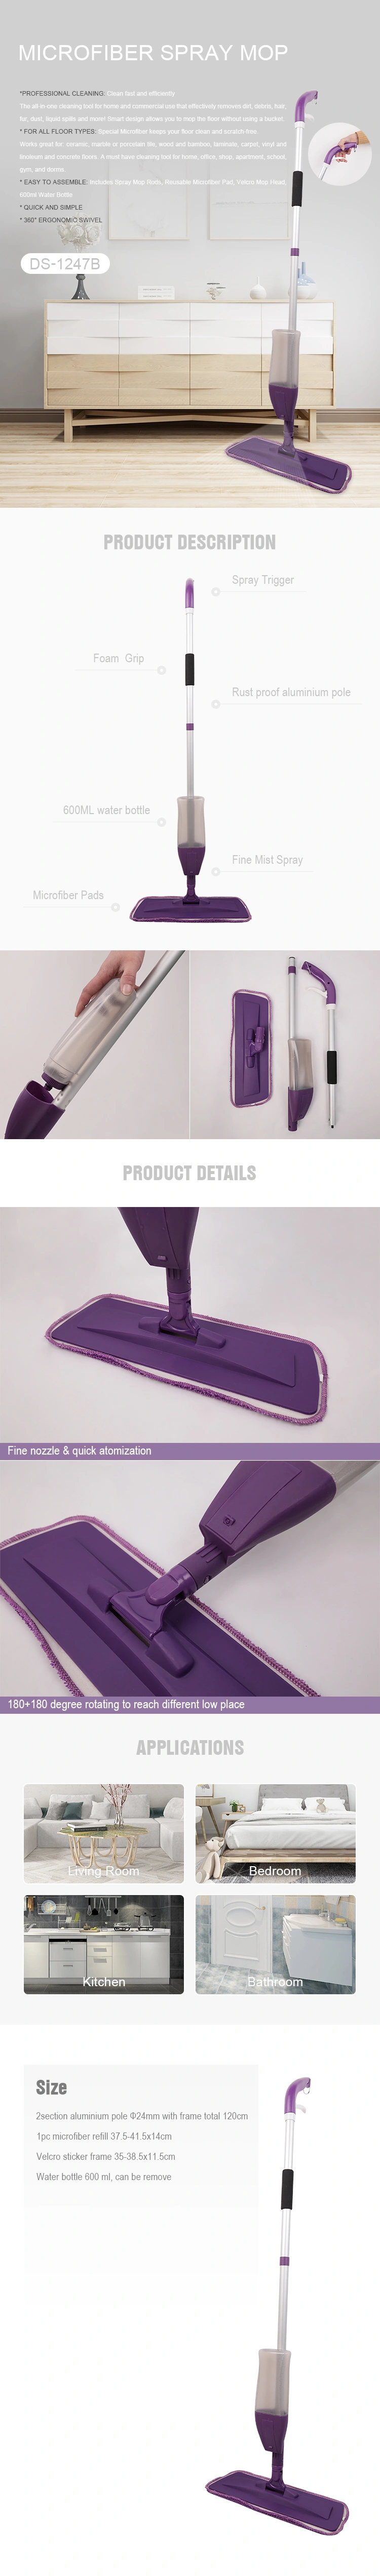 Floor Cleaning Magic Healthy Spray Mop with Rectangle Microfiber Head